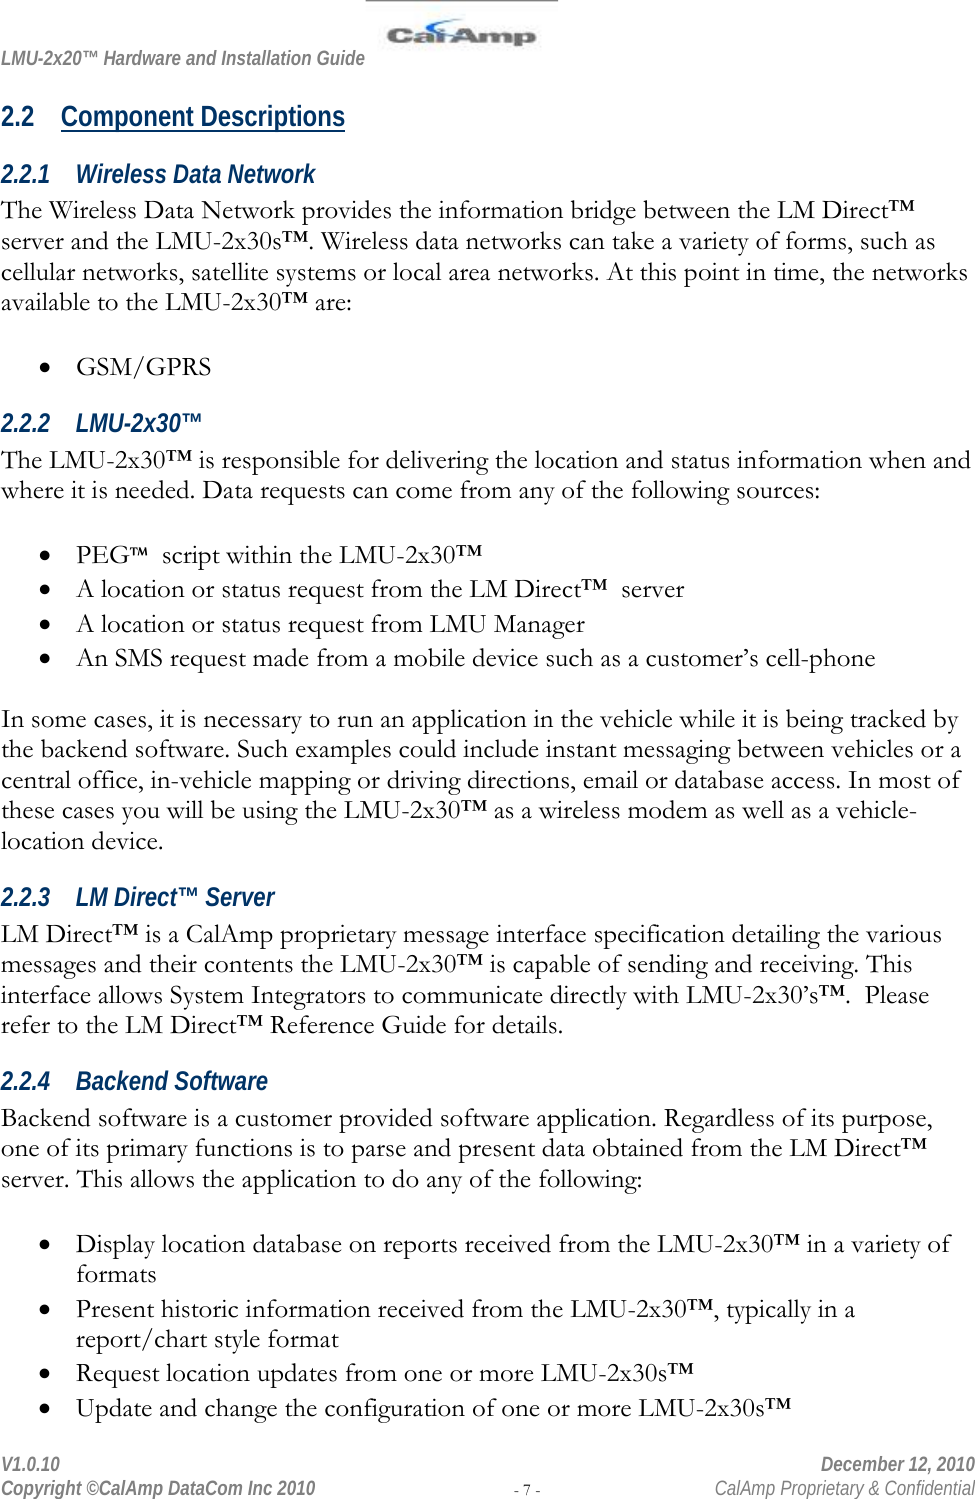 LMU-2x20™ Hardware and Installation Guide  V1.0.10    December 12, 2010 Copyright ©CalAmp DataCom Inc 2010 - 7 -  CalAmp Proprietary &amp; Confidential 2.2 Component Descriptions 2.2.1 Wireless Data Network The Wireless Data Network provides the information bridge between the LM Direct™ server and the LMU-2x30s™. Wireless data networks can take a variety of forms, such as cellular networks, satellite systems or local area networks. At this point in time, the networks available to the LMU-2x30™ are:  • GSM/GPRS 2.2.2 LMU-2x30™ The LMU-2x30™ is responsible for delivering the location and status information when and where it is needed. Data requests can come from any of the following sources:  • PEG™  script within the LMU-2x30™ • A location or status request from the LM Direct™  server • A location or status request from LMU Manager • An SMS request made from a mobile device such as a customer’s cell-phone  In some cases, it is necessary to run an application in the vehicle while it is being tracked by the backend software. Such examples could include instant messaging between vehicles or a central office, in-vehicle mapping or driving directions, email or database access. In most of these cases you will be using the LMU-2x30™ as a wireless modem as well as a vehicle-location device. 2.2.3 LM Direct™ Server LM Direct™ is a CalAmp proprietary message interface specification detailing the various messages and their contents the LMU-2x30™ is capable of sending and receiving. This interface allows System Integrators to communicate directly with LMU-2x30’s™.  Please refer to the LM Direct™ Reference Guide for details. 2.2.4 Backend Software Backend software is a customer provided software application. Regardless of its purpose, one of its primary functions is to parse and present data obtained from the LM Direct™ server. This allows the application to do any of the following:  • Display location database on reports received from the LMU-2x30™ in a variety of formats • Present historic information received from the LMU-2x30™, typically in a report/chart style format • Request location updates from one or more LMU-2x30s™ • Update and change the configuration of one or more LMU-2x30s™ 